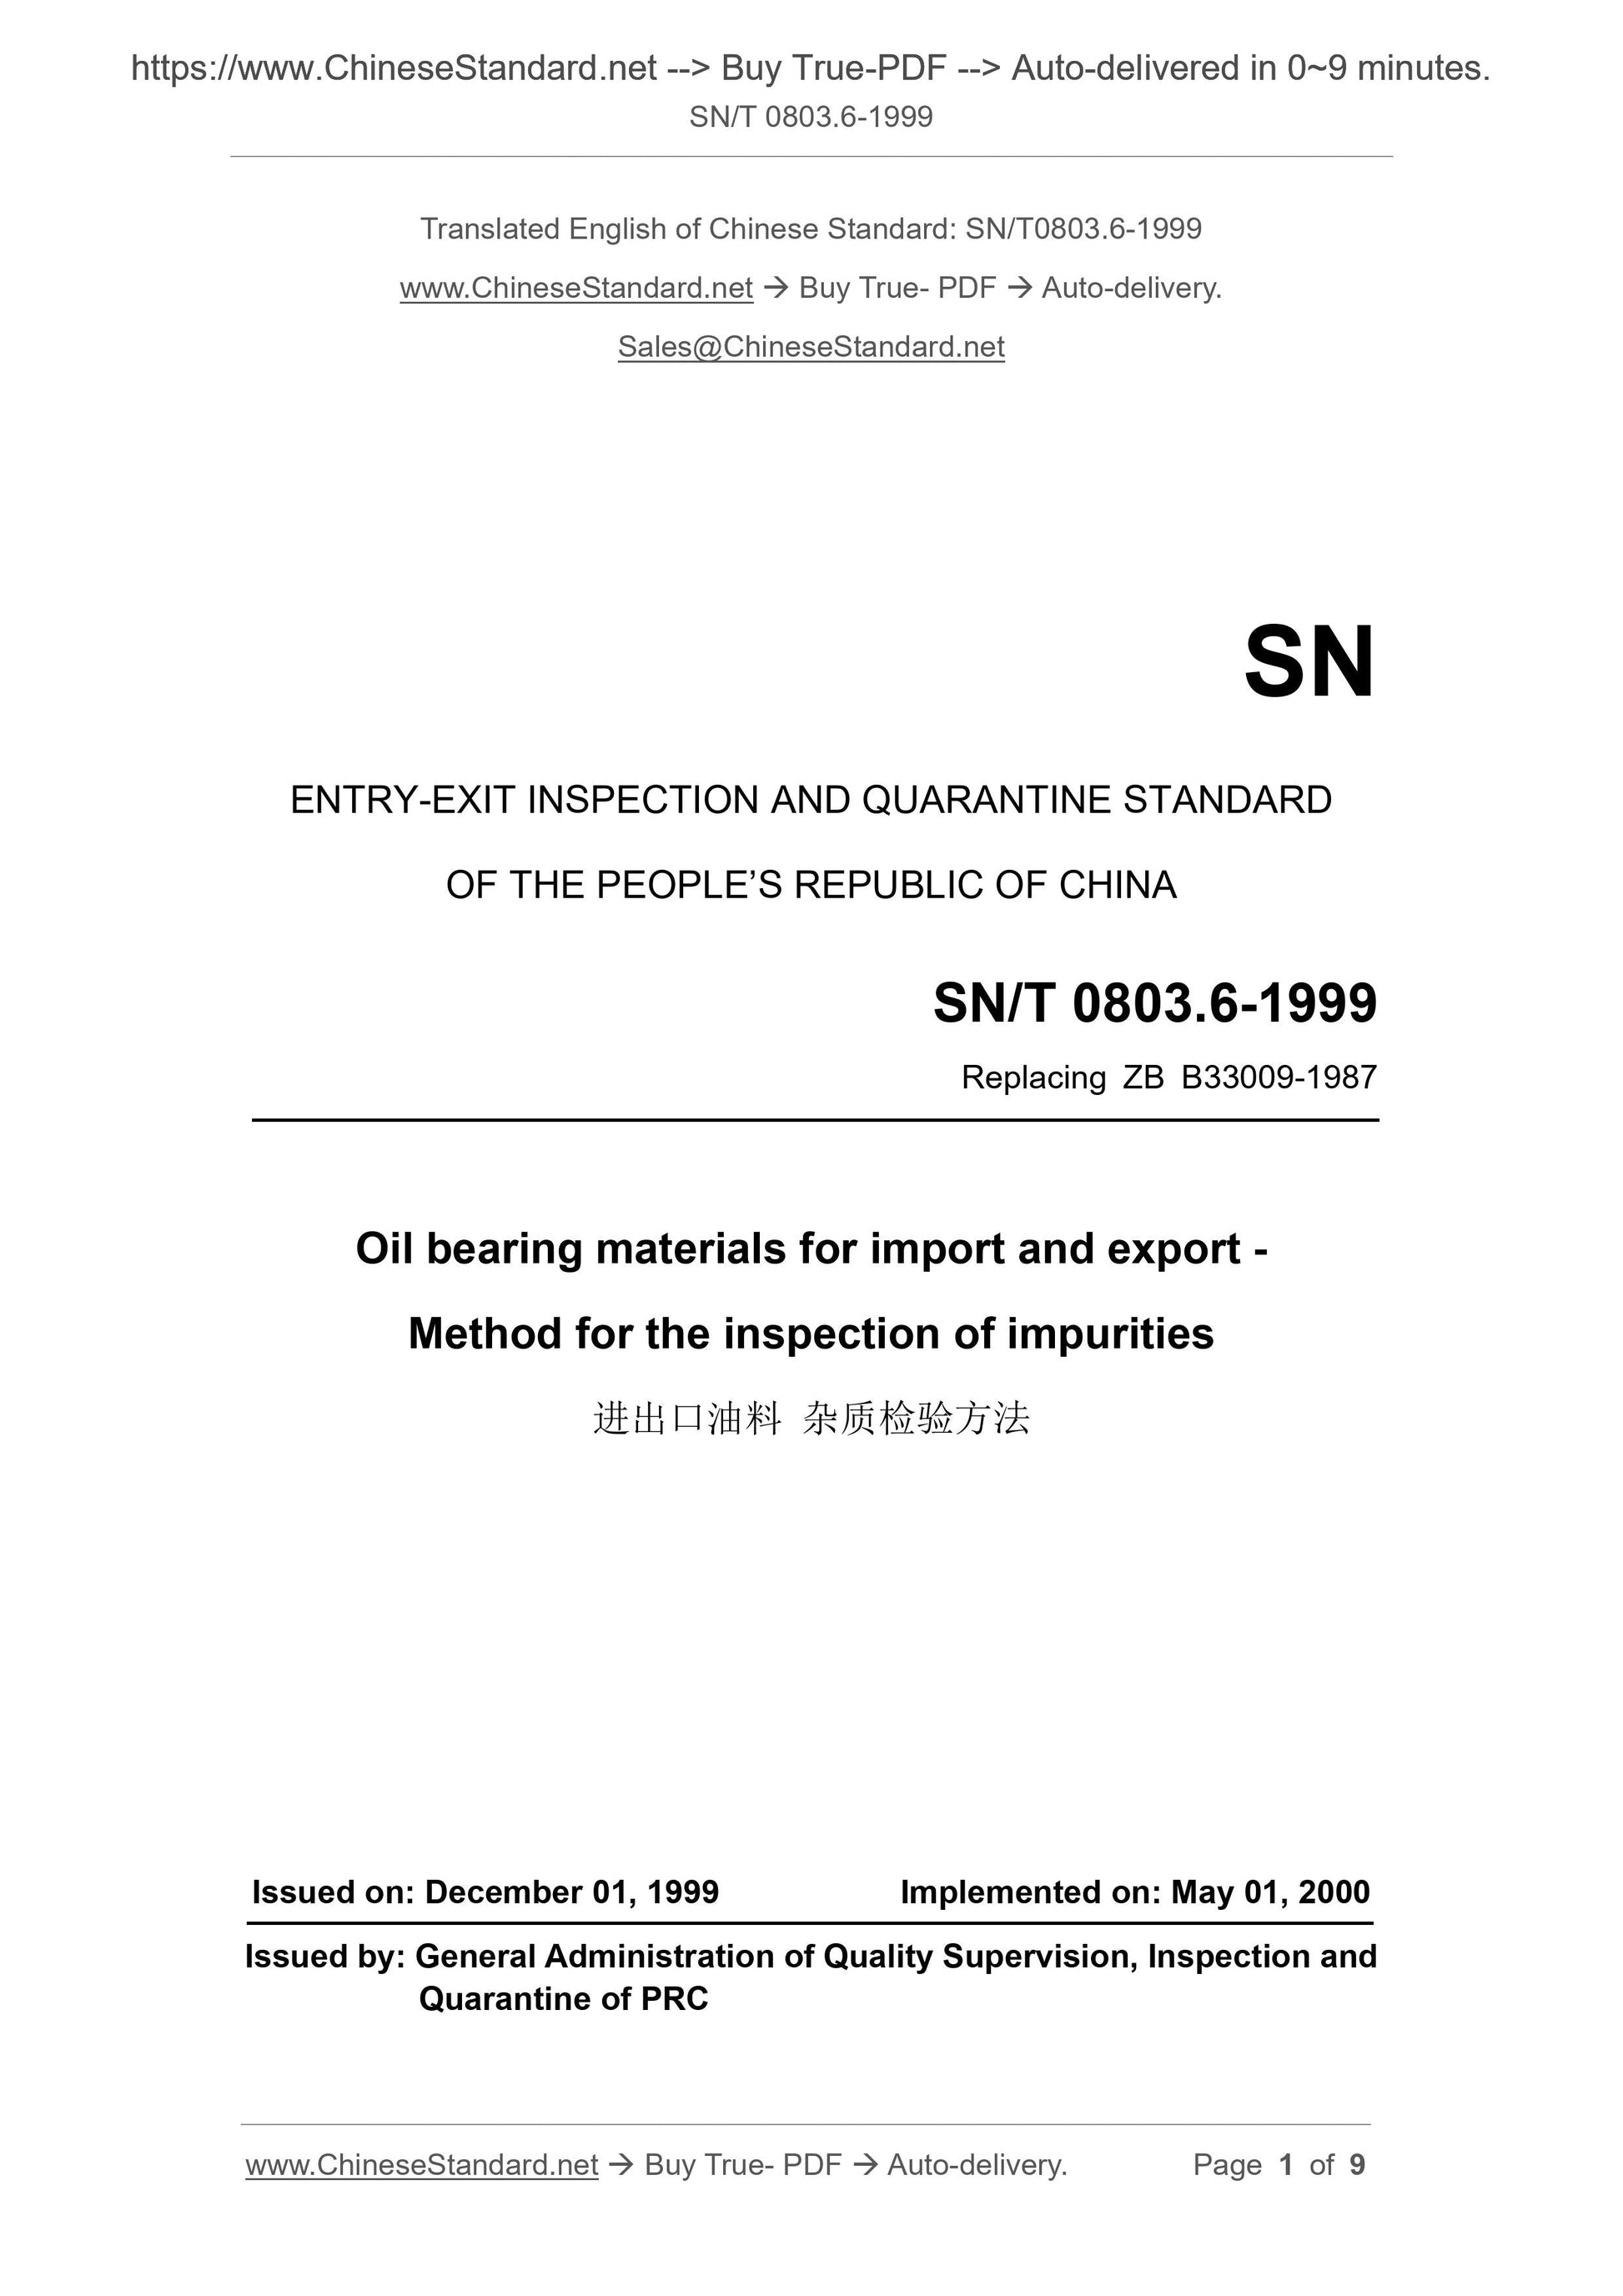 SN/T 0803.6-1999 Page 1